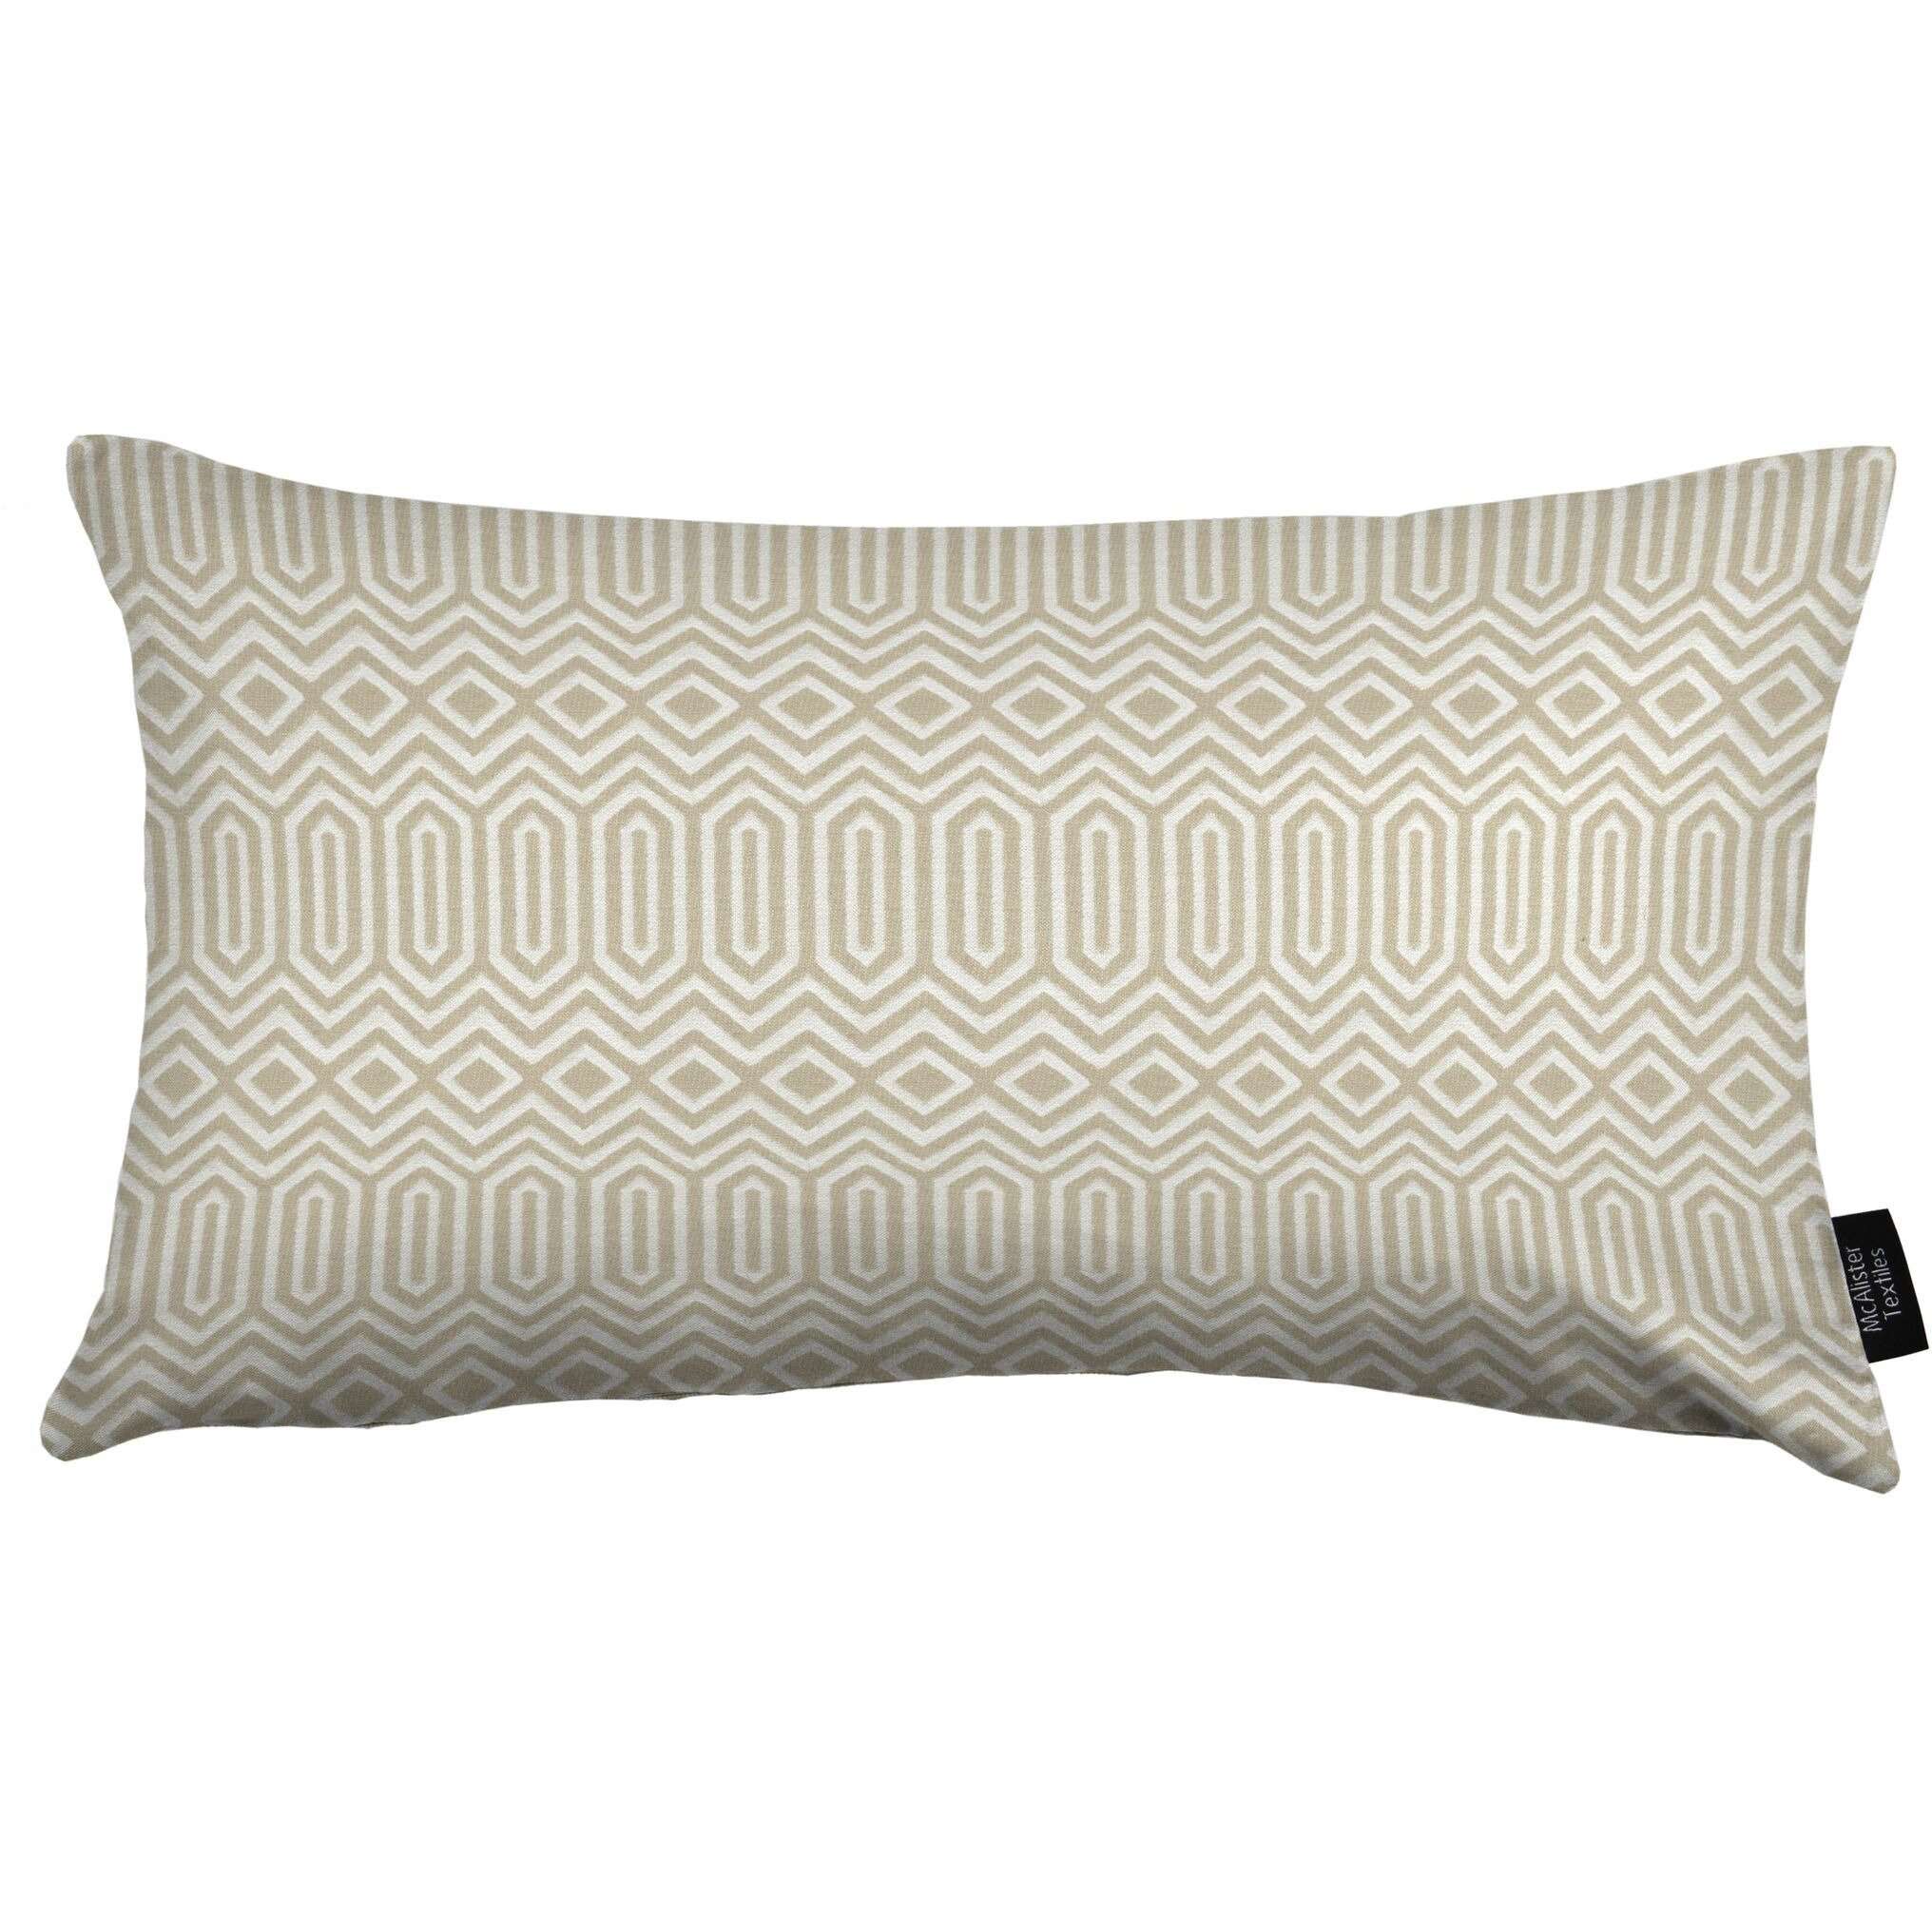 McAlister Textiles Colorado Geometric Taupe Beige Pillow Pillow Cover Only 50cm x 30cm 